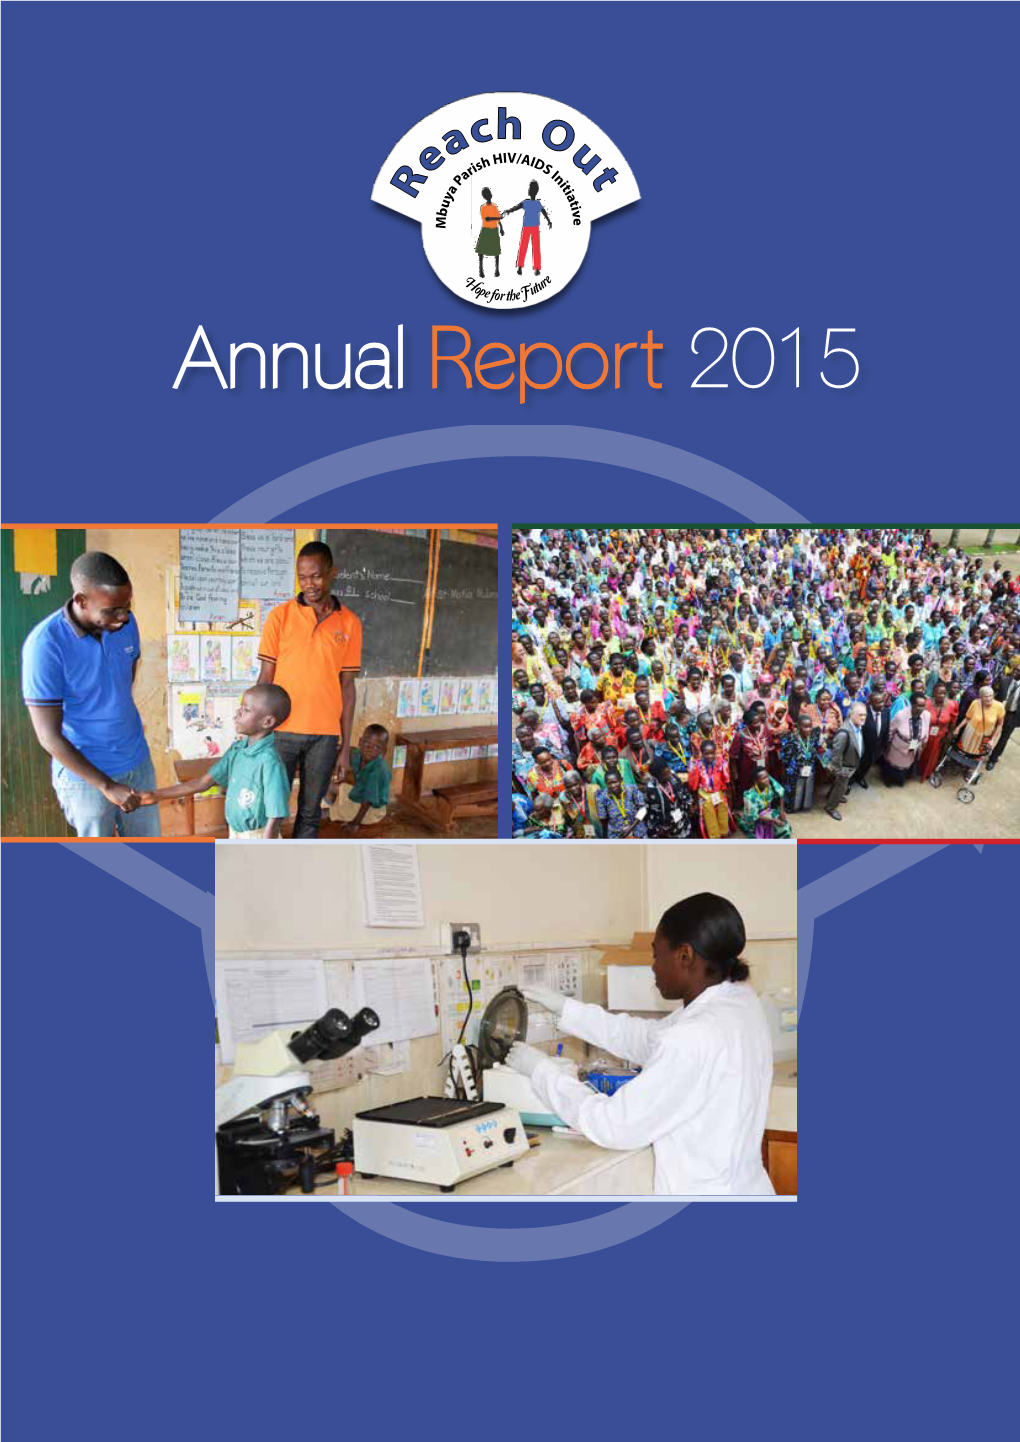 Annual Report 2015 Carnations